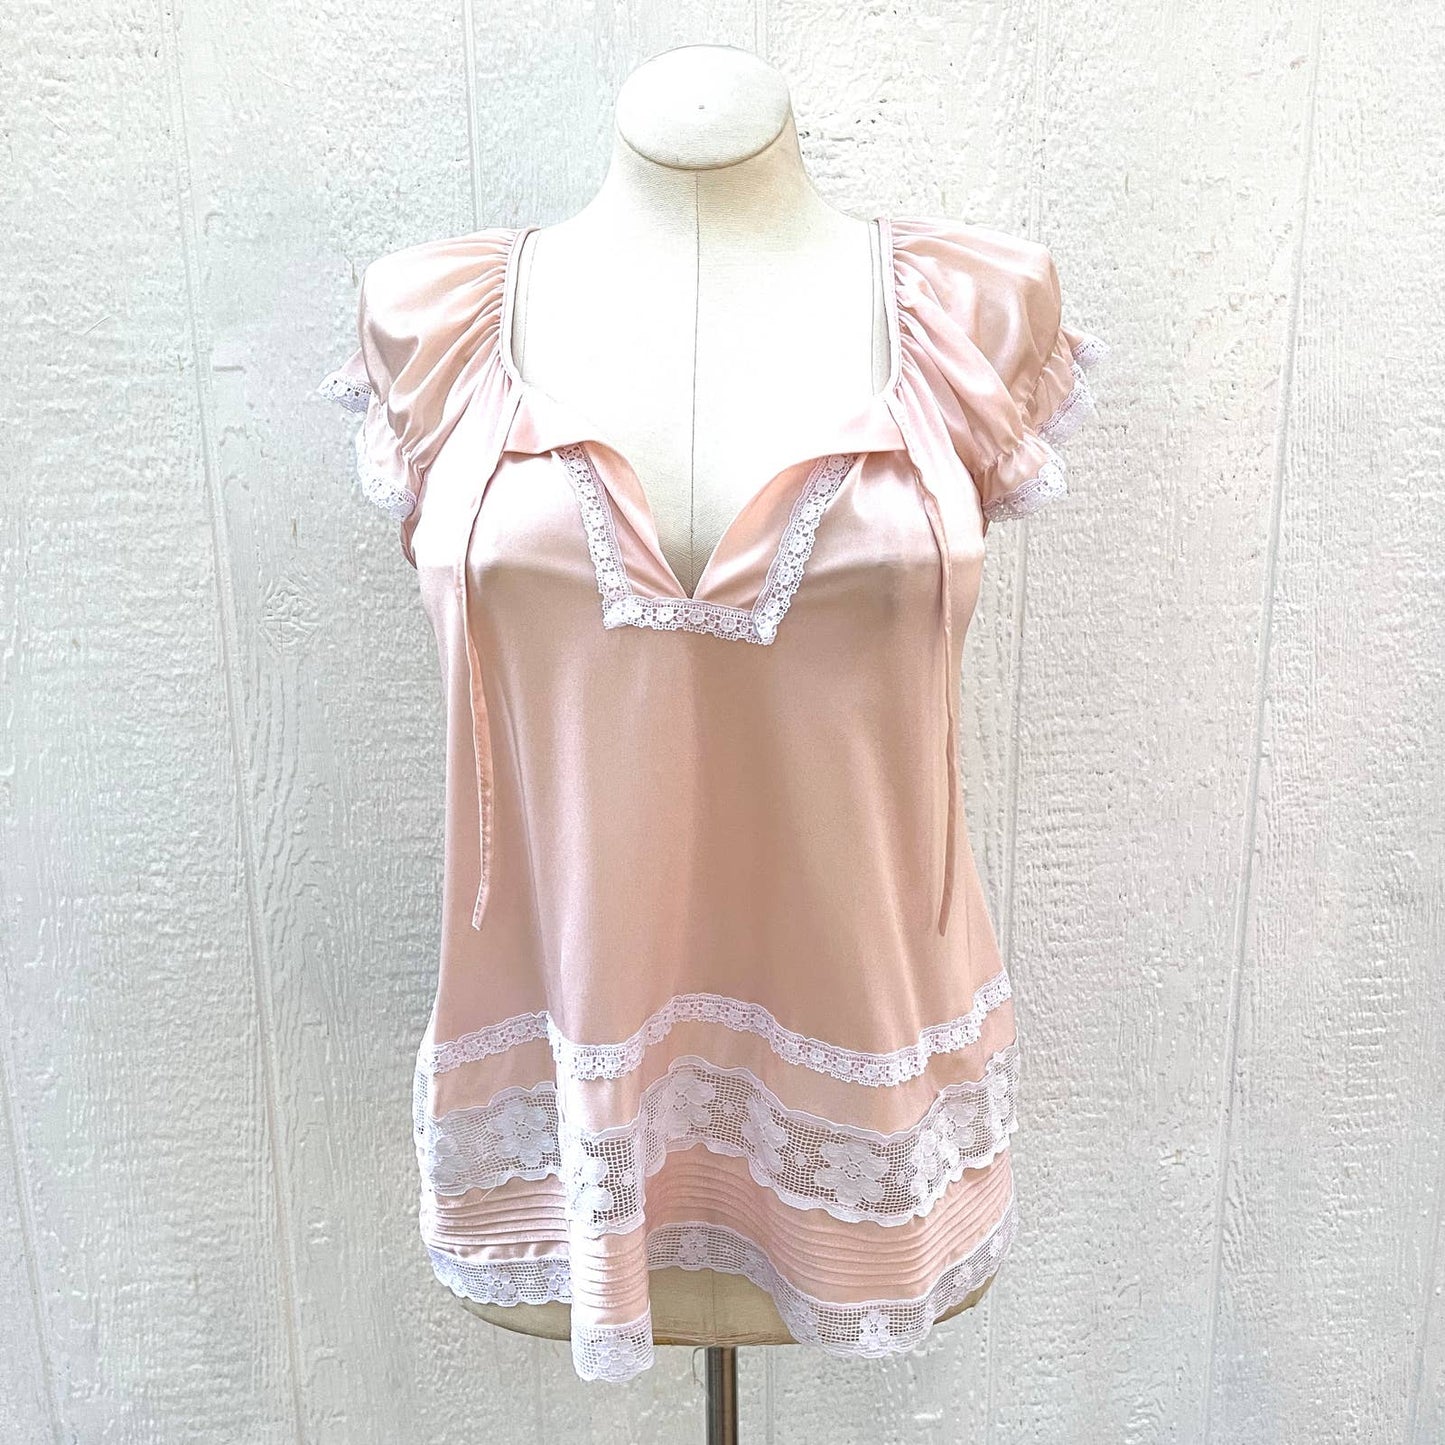 Vintage 70s Peach and Cream Pajama Top Flutter Sleeve Floral Lace Trim Size M